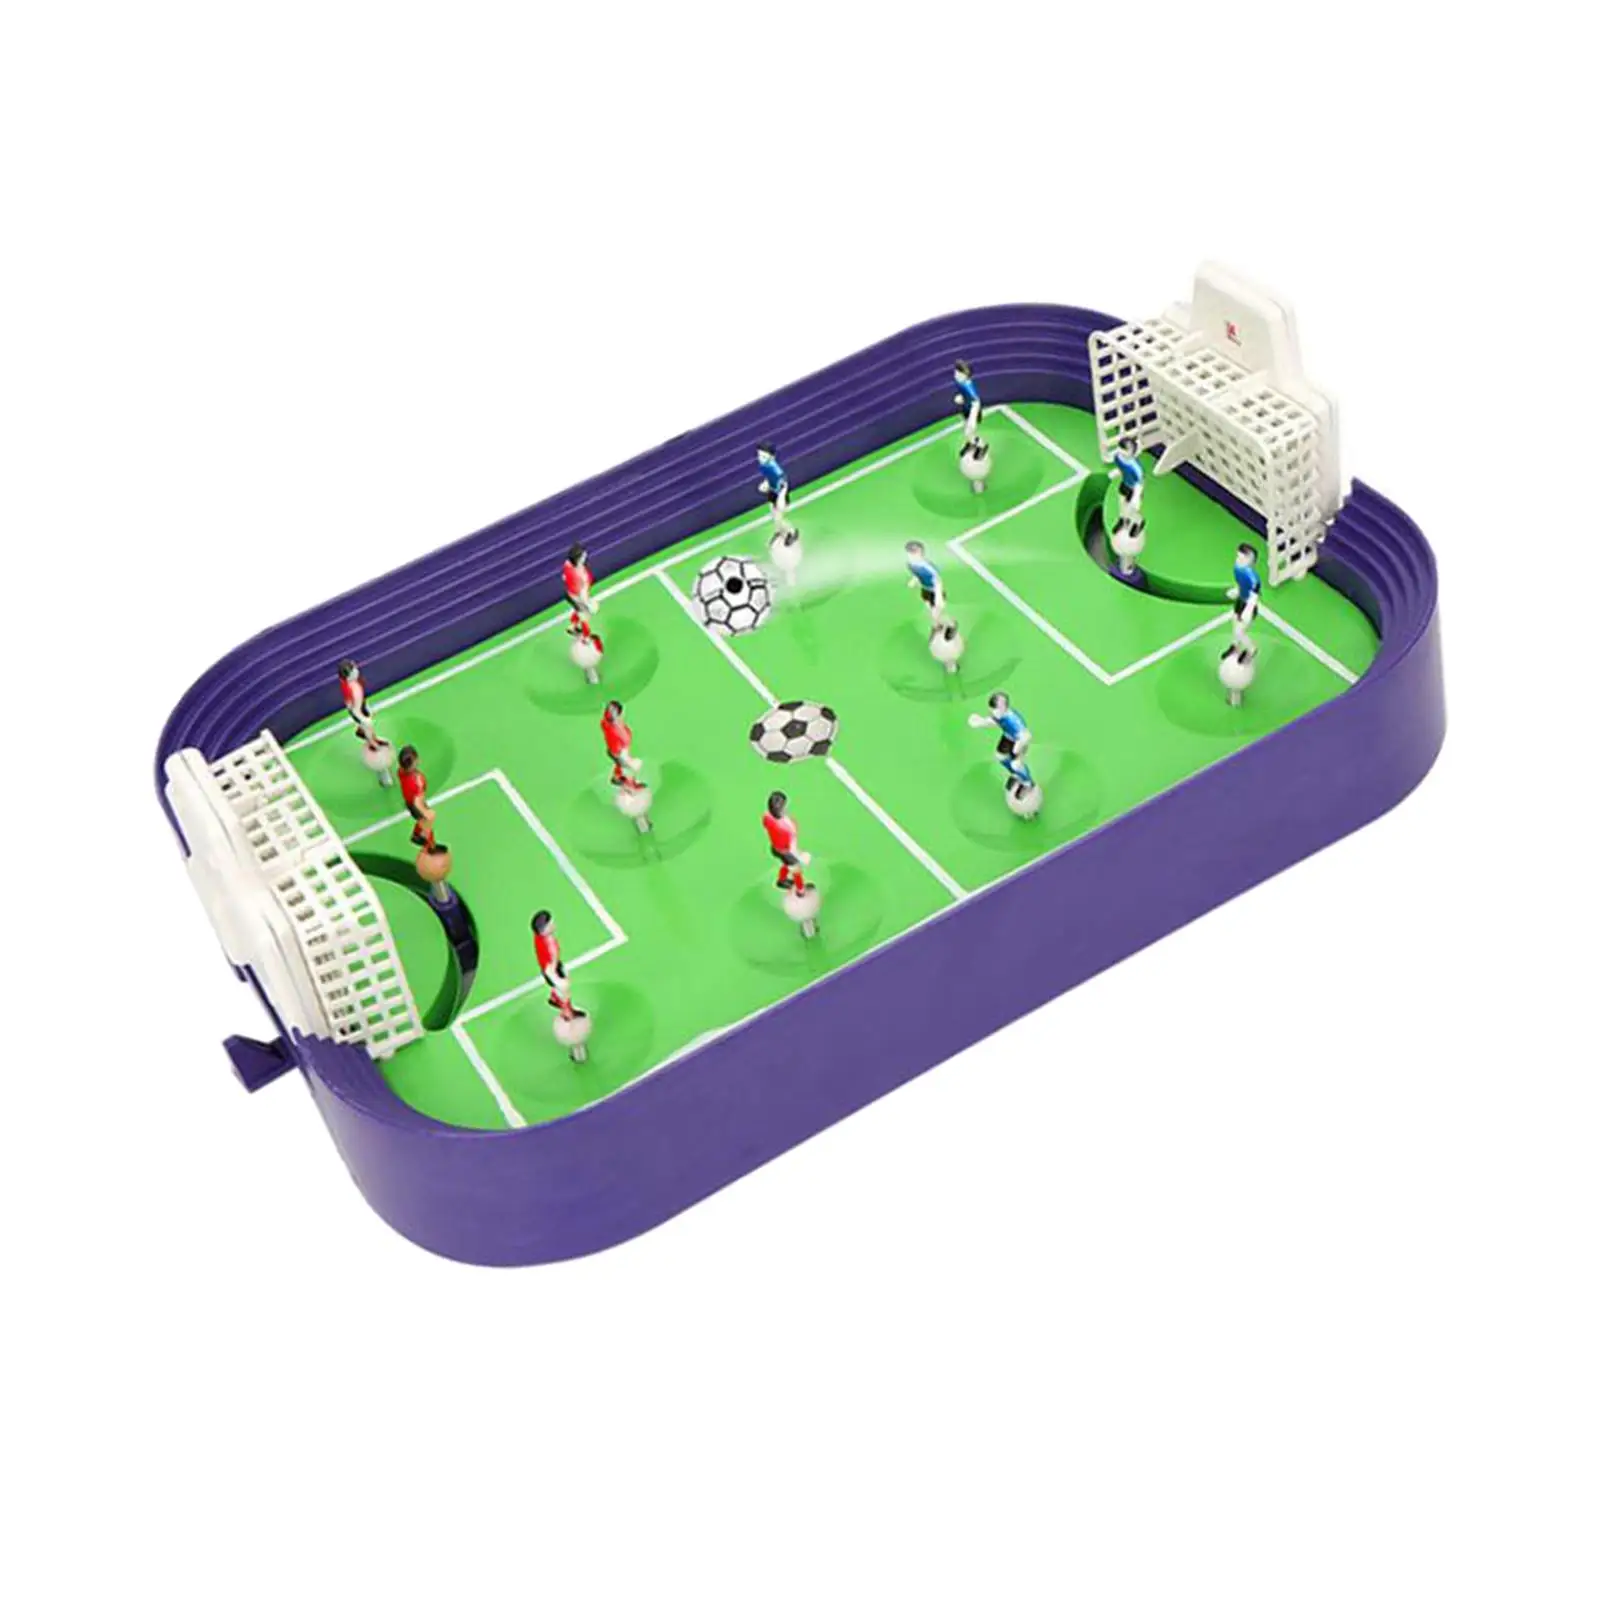 Portable Table Football Game Soccer Table Game Table Board Interactive Toy Mini Tabletop Football for Teens Boys Adults Family